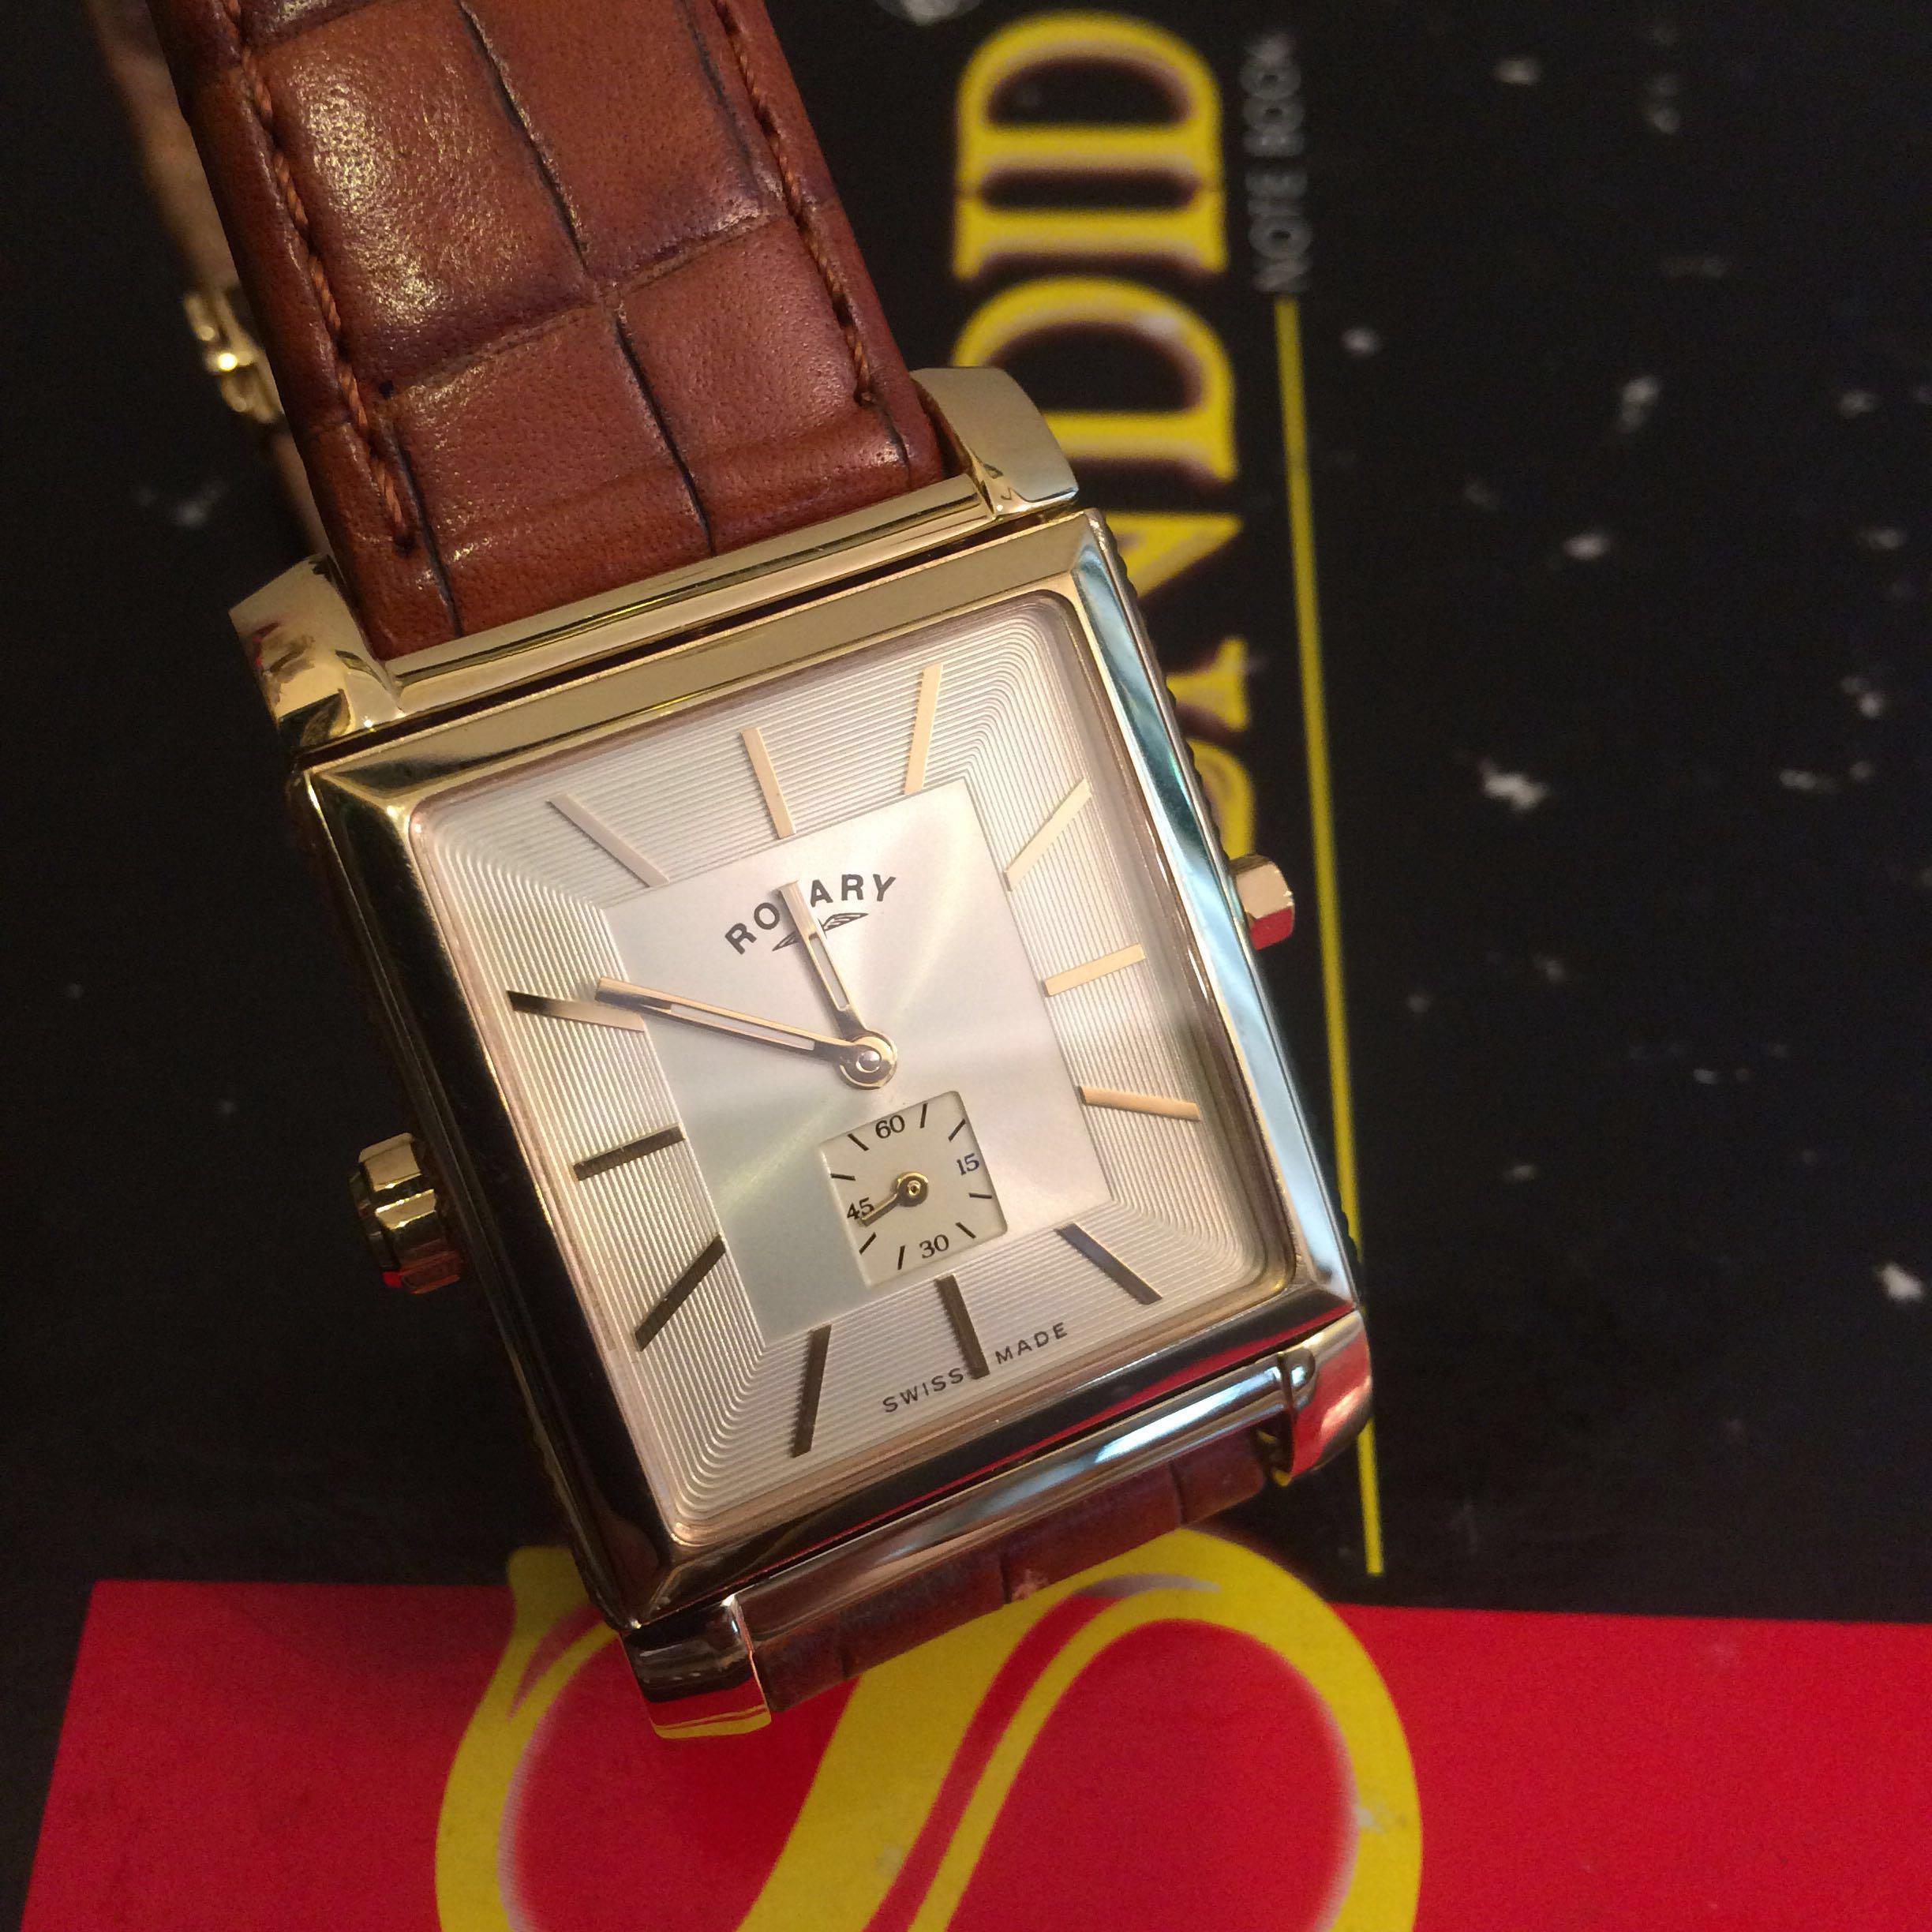 Rare Dual Face Authentic Rotary Revelation Dual Timewatch Quartz Sold Luxury Watches On Carousell